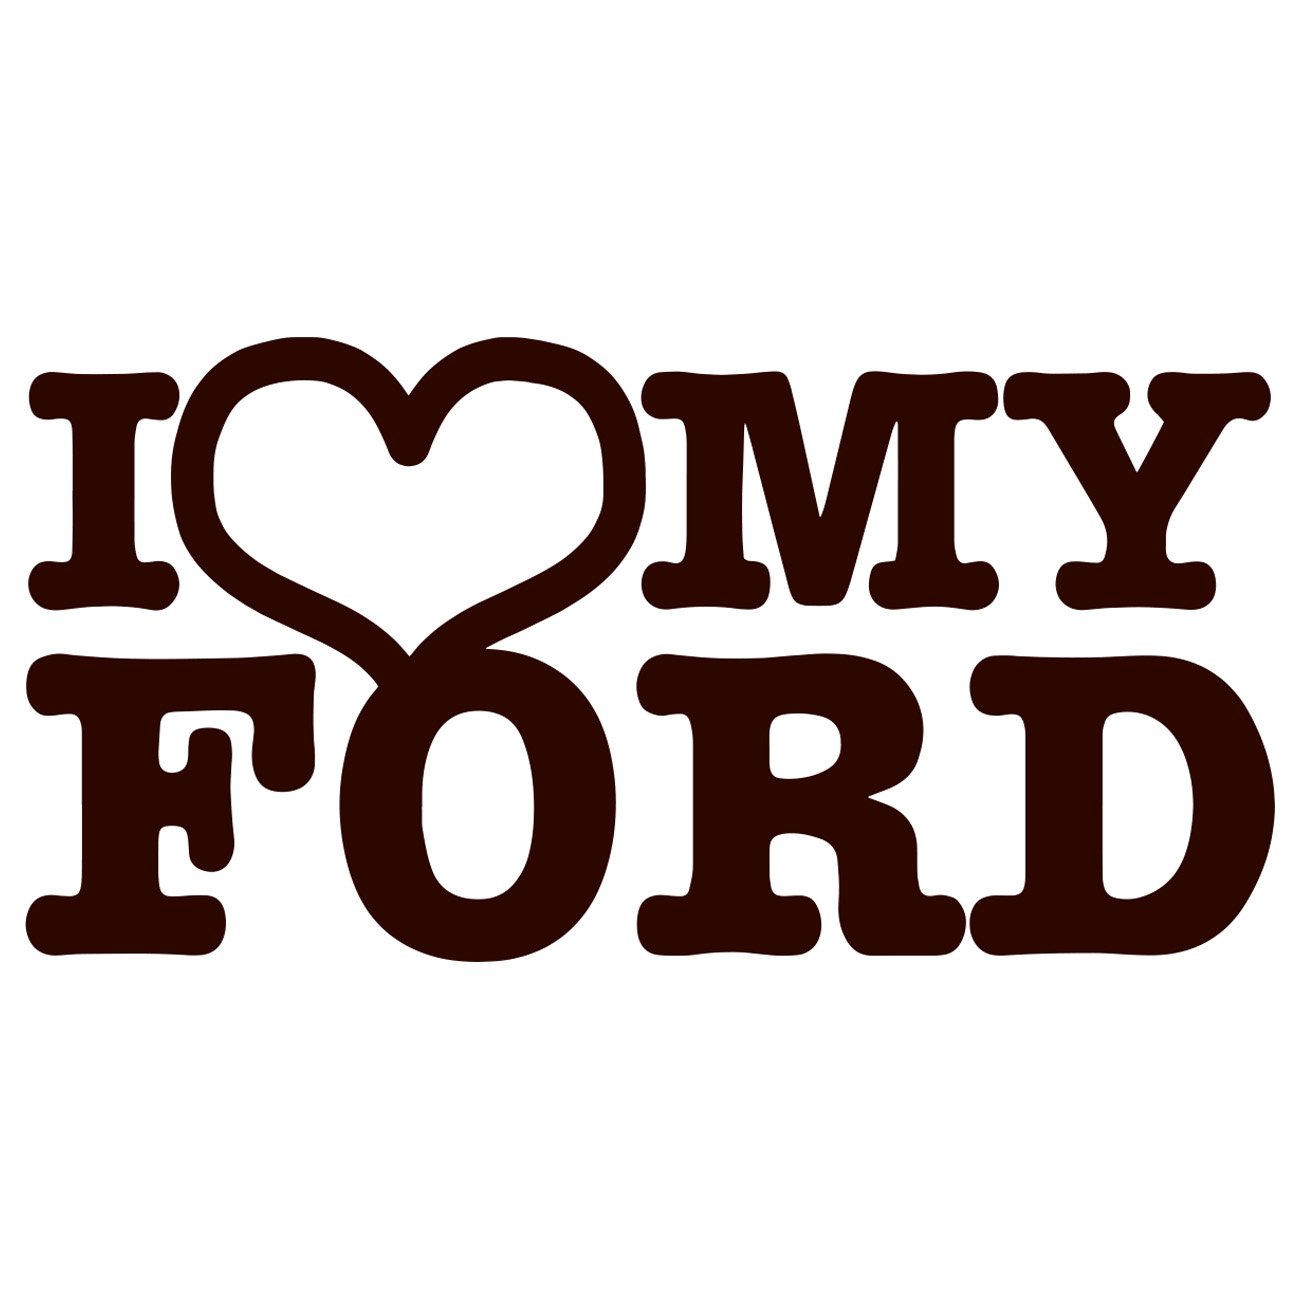 I love my Ford